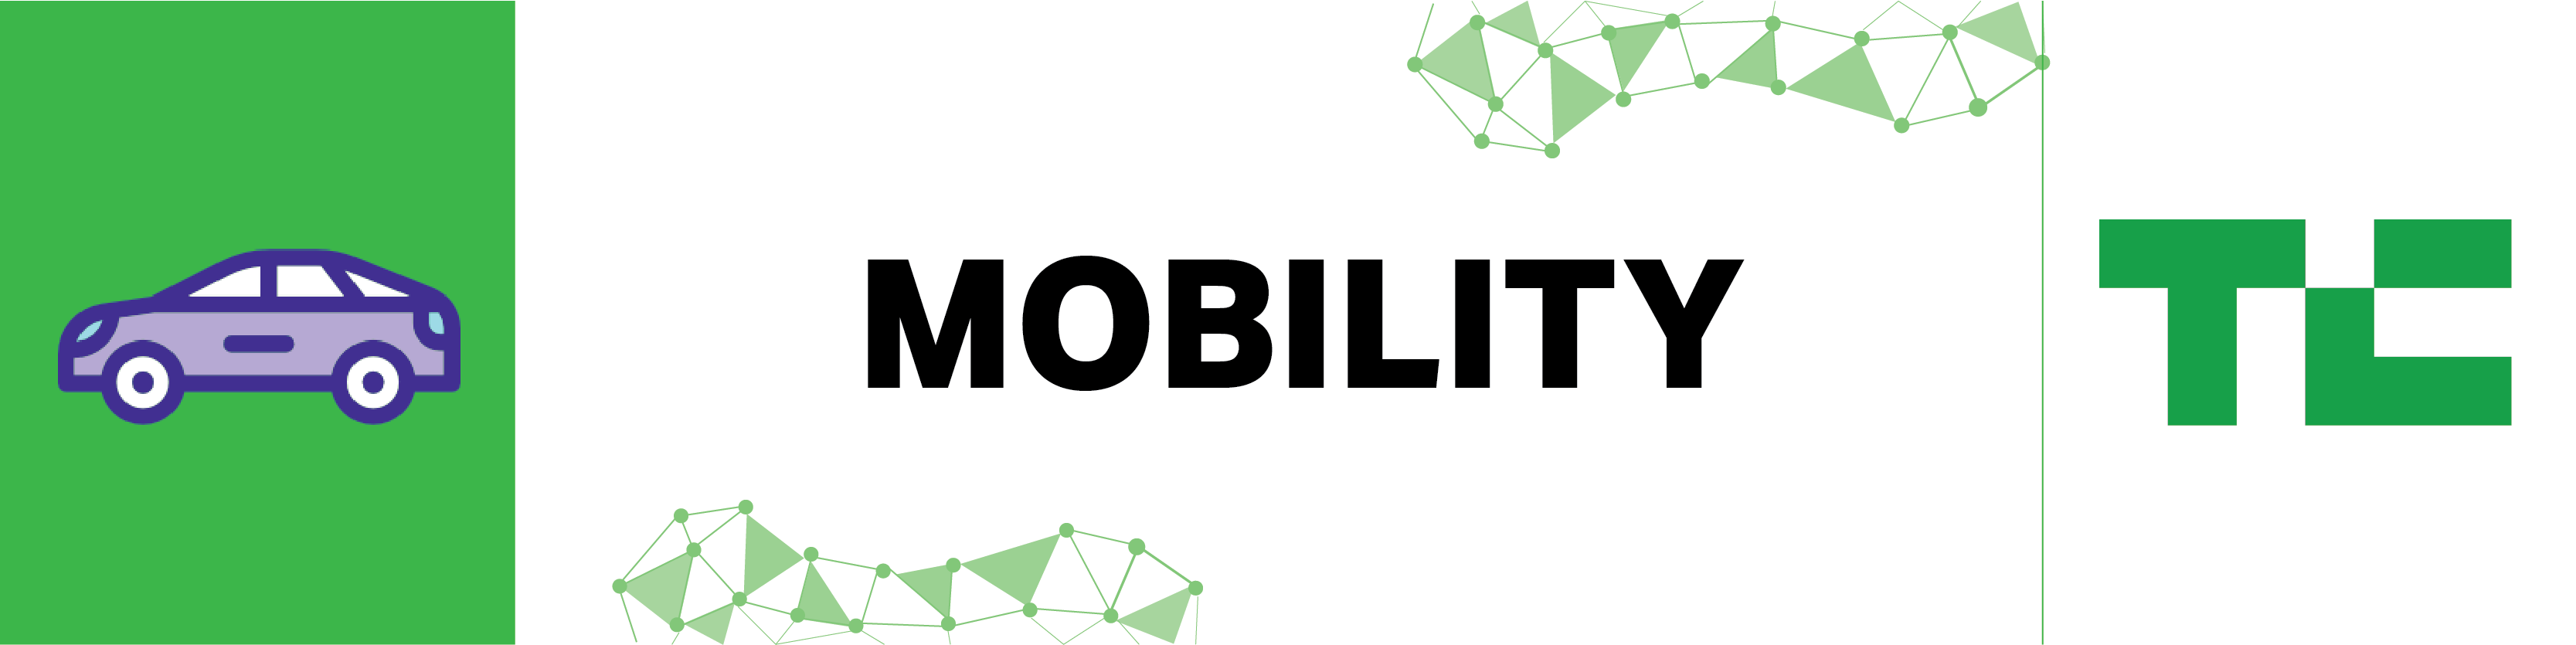 How top VCs view the new future of micromobility – TechCrunch 1